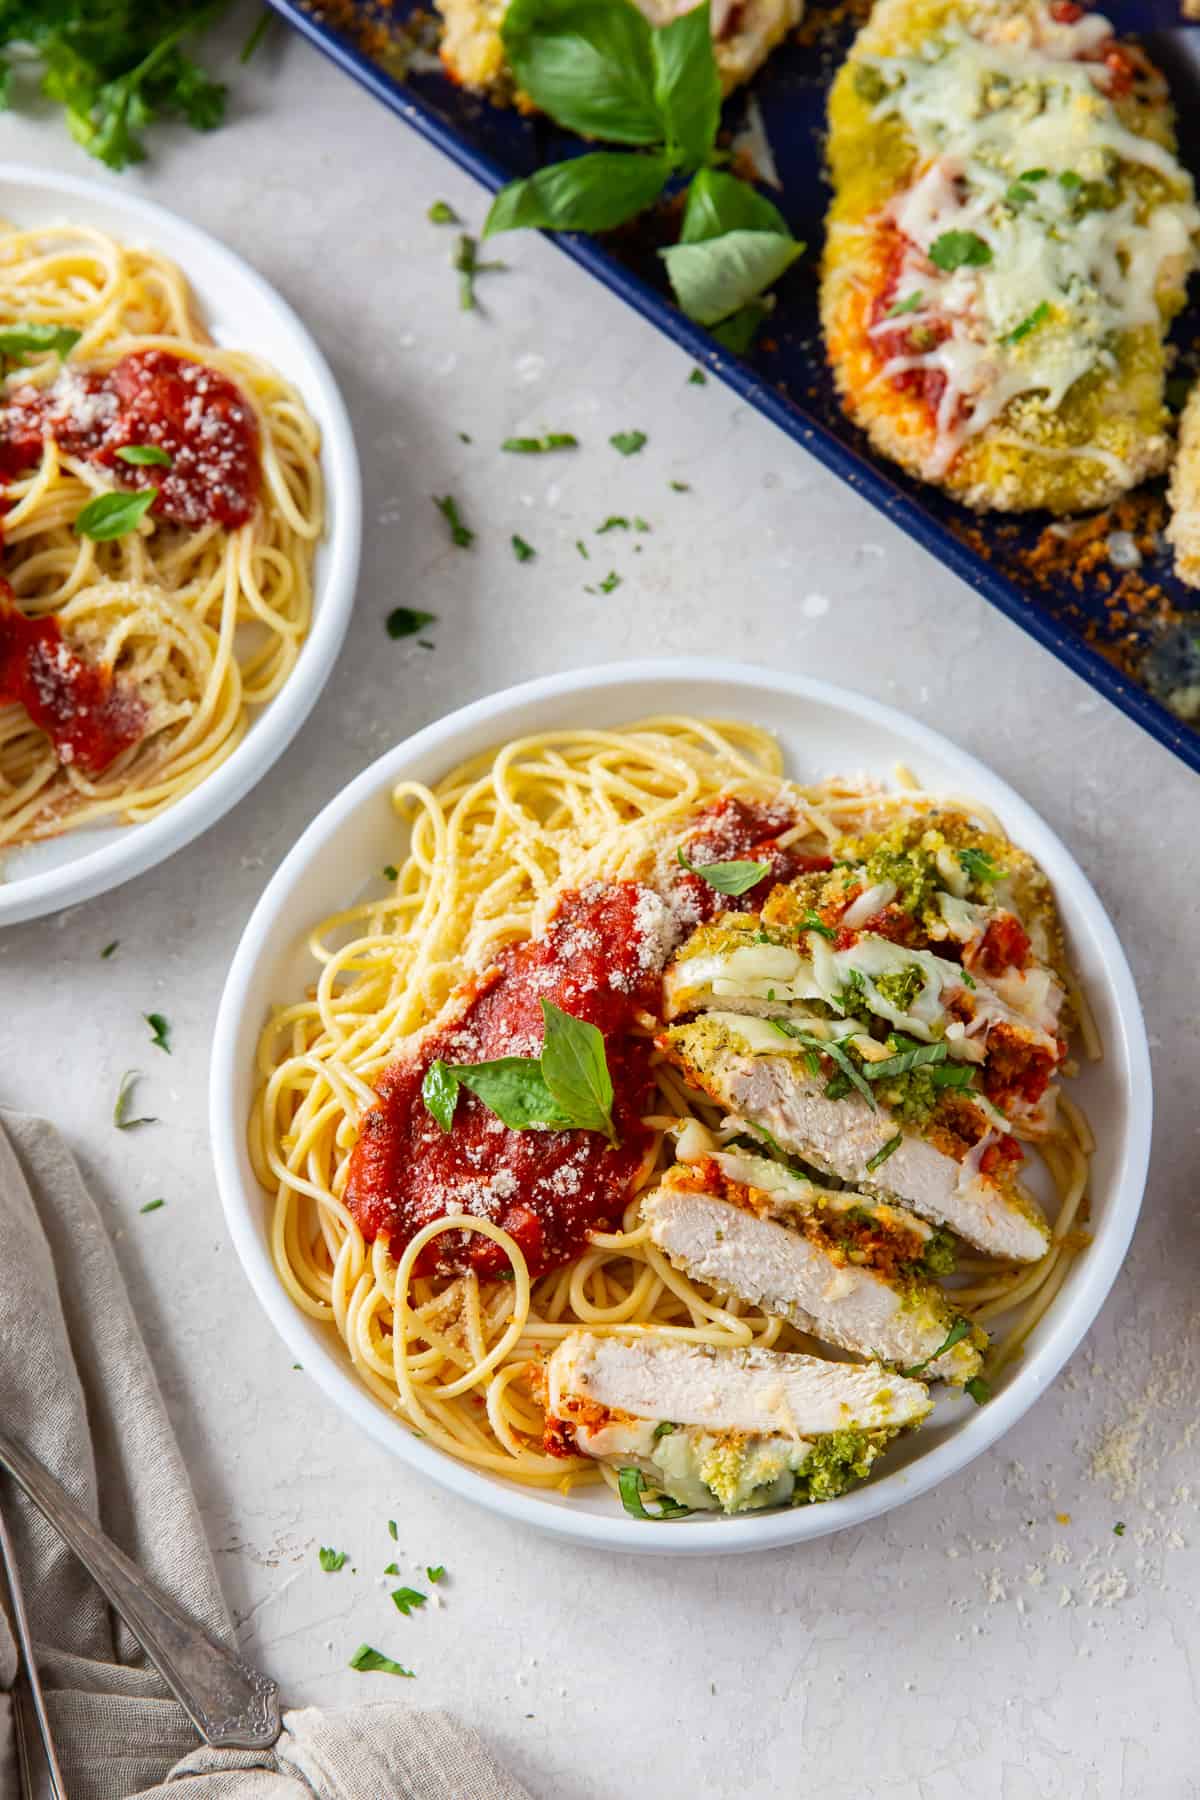 Sliced Chicken Pesto Parmesan in a white dish with pasta and marinara sauce.